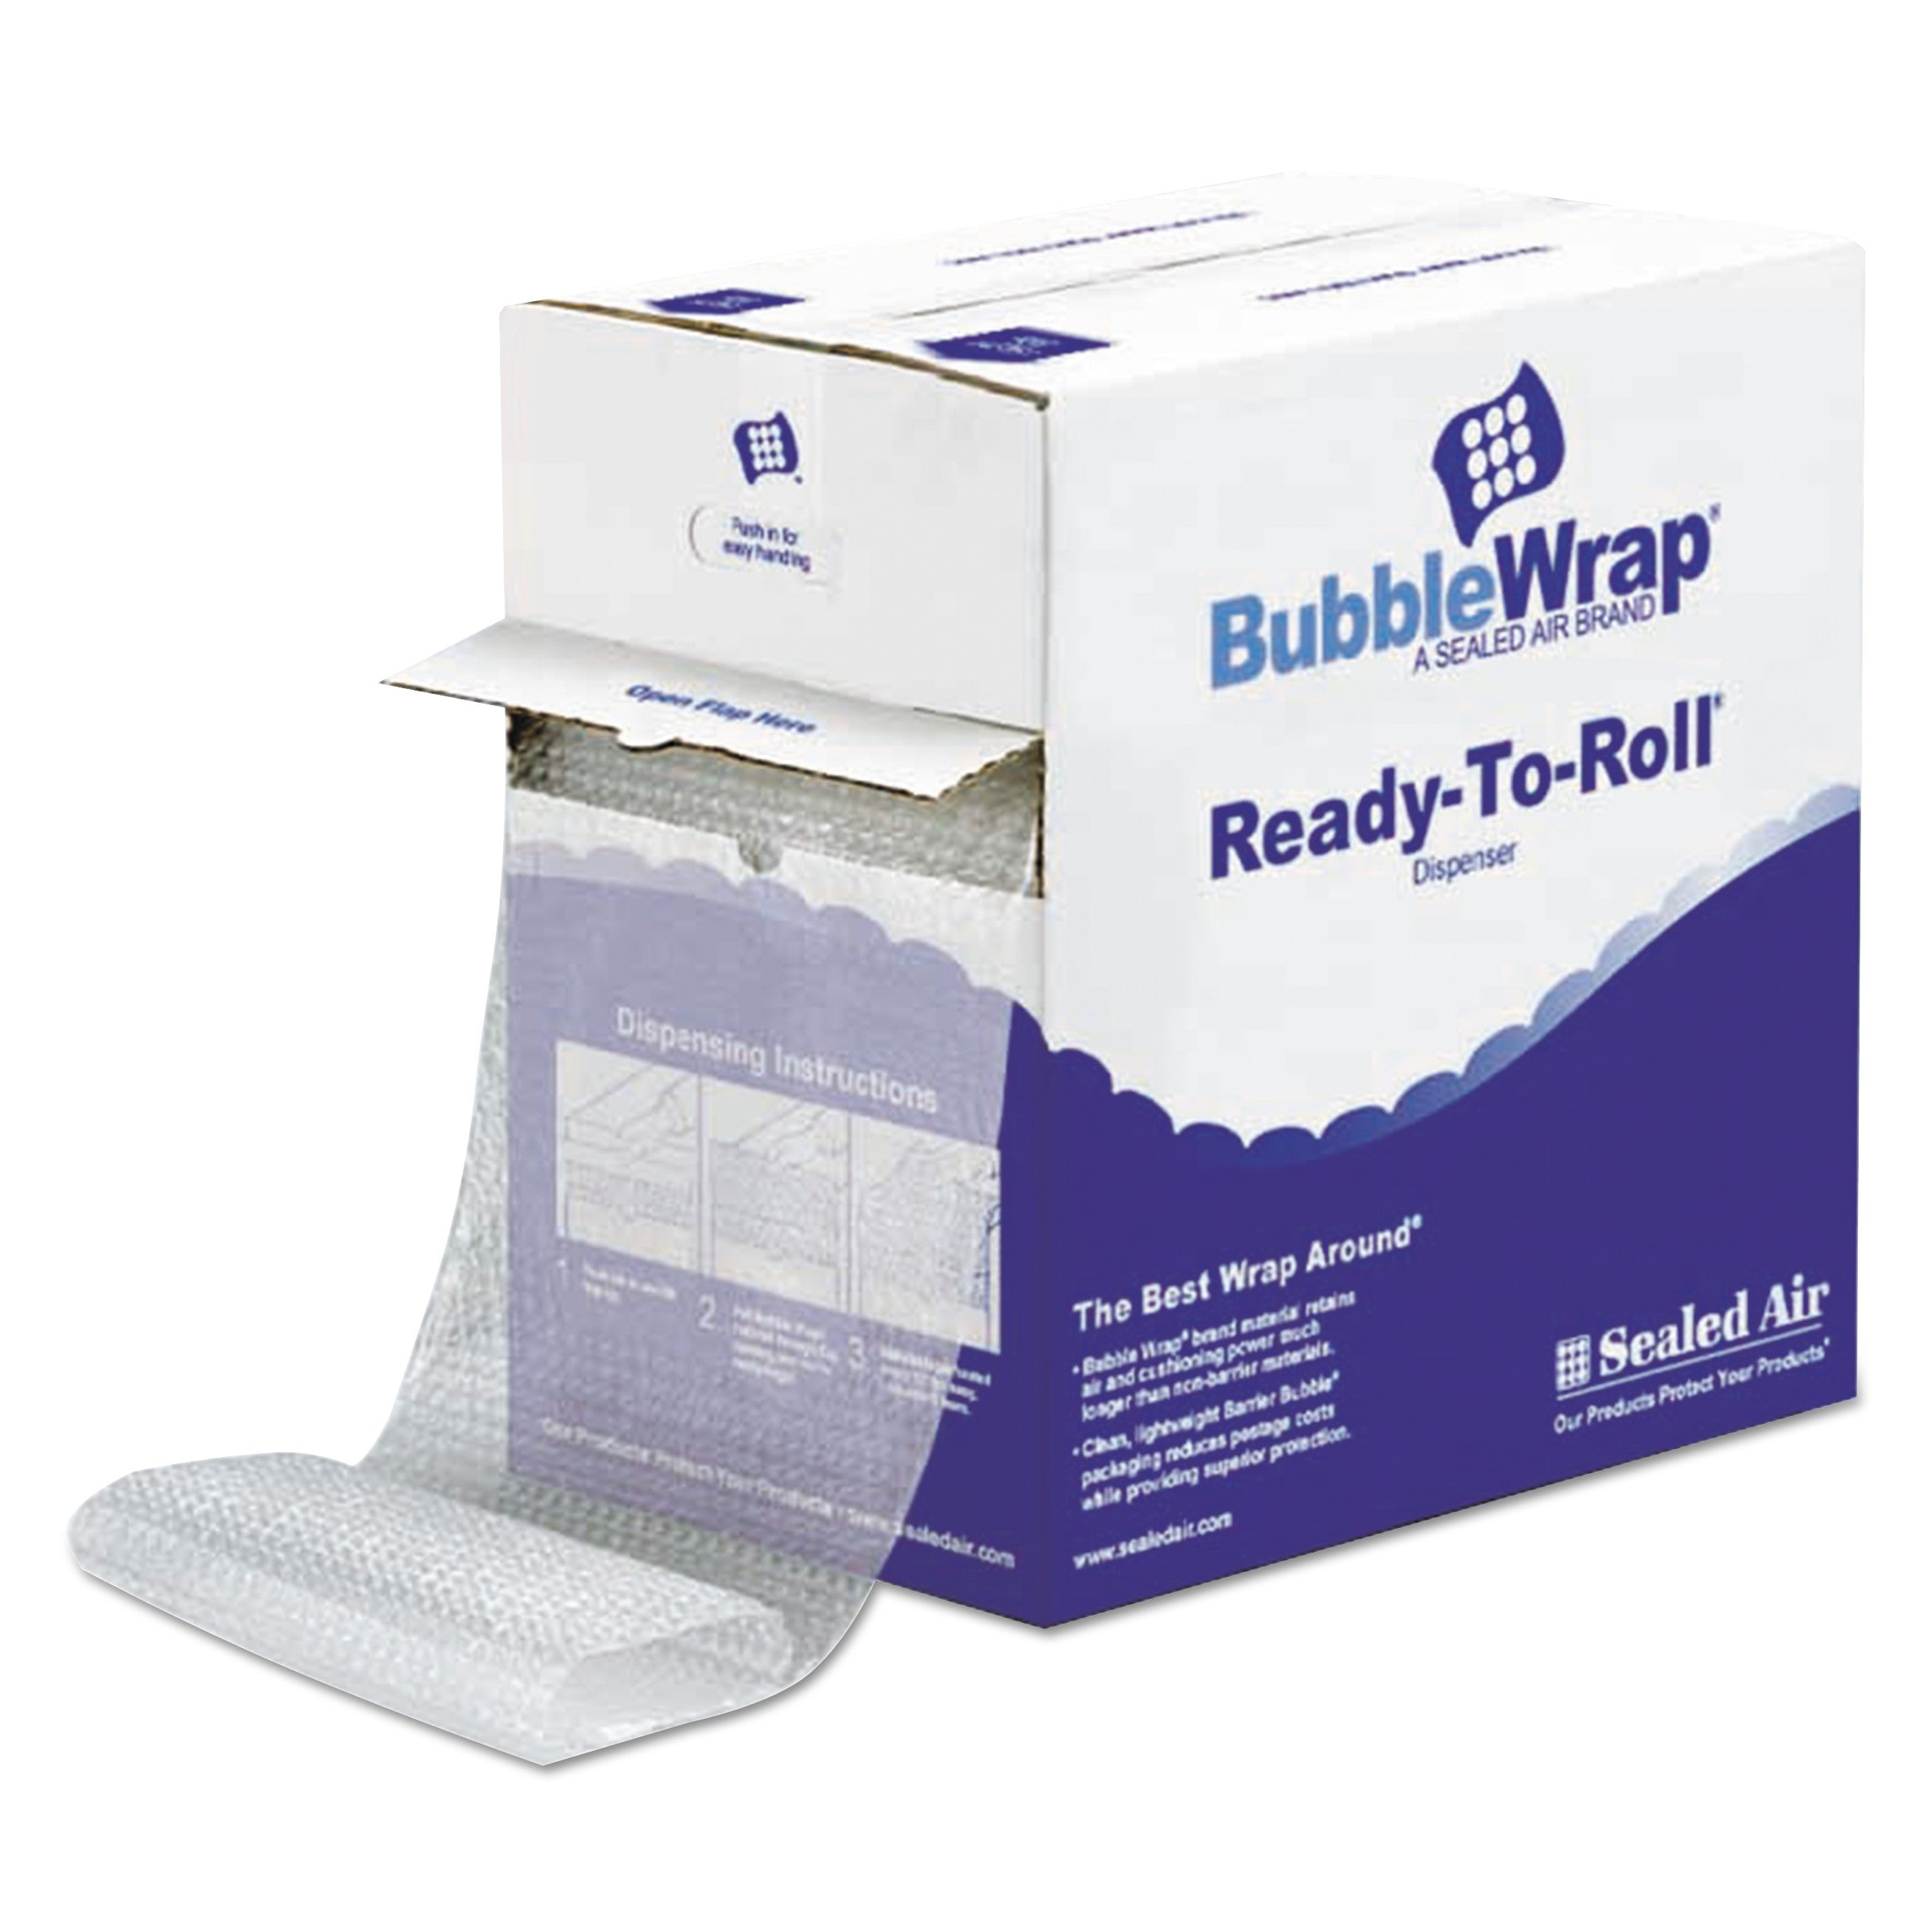 Bubble Wrap Cushioning Material in Dispenser Box, 0.19" Thick, 12" x 175 ft - 